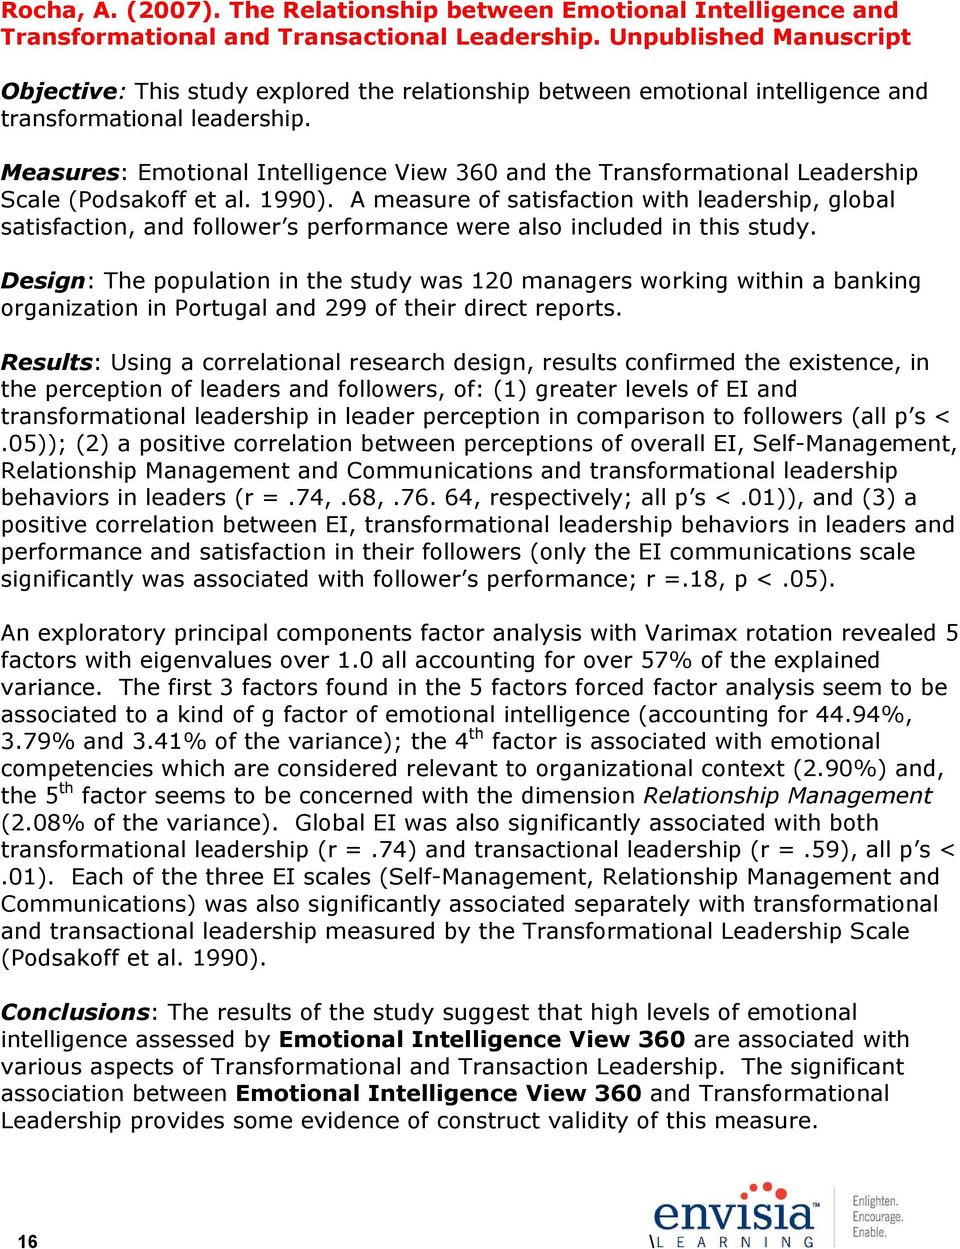 Measures: Emotional Intelligence View 360 and the Transformational Leadership Scale (Podsakoff et al. 1990).